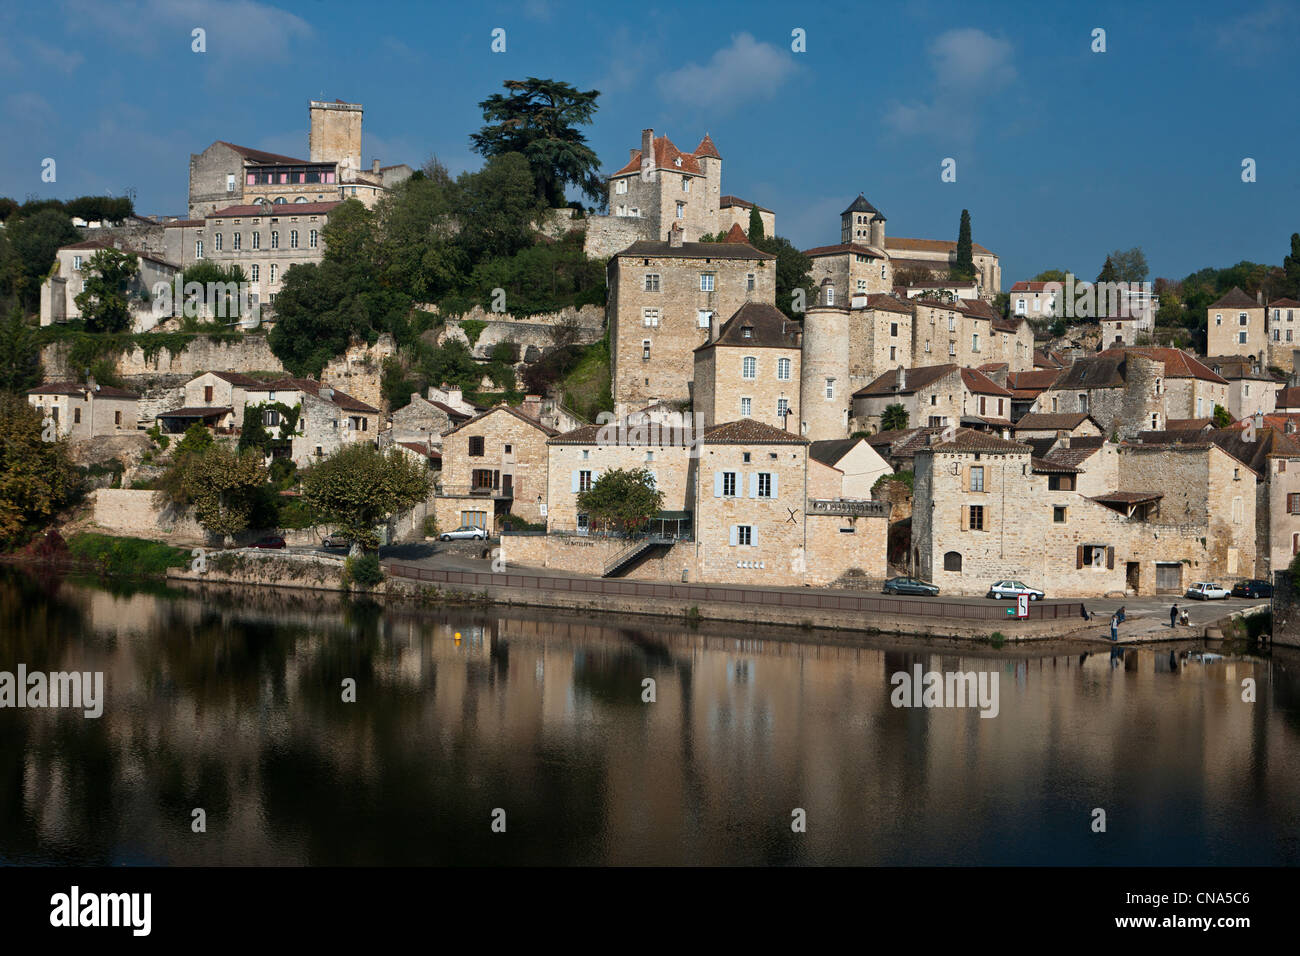 France, Lot, Puy l'Eveque, medieval, stepped on the right bank of the Lot, the old houses of the city with beautiful stones Stock Photo